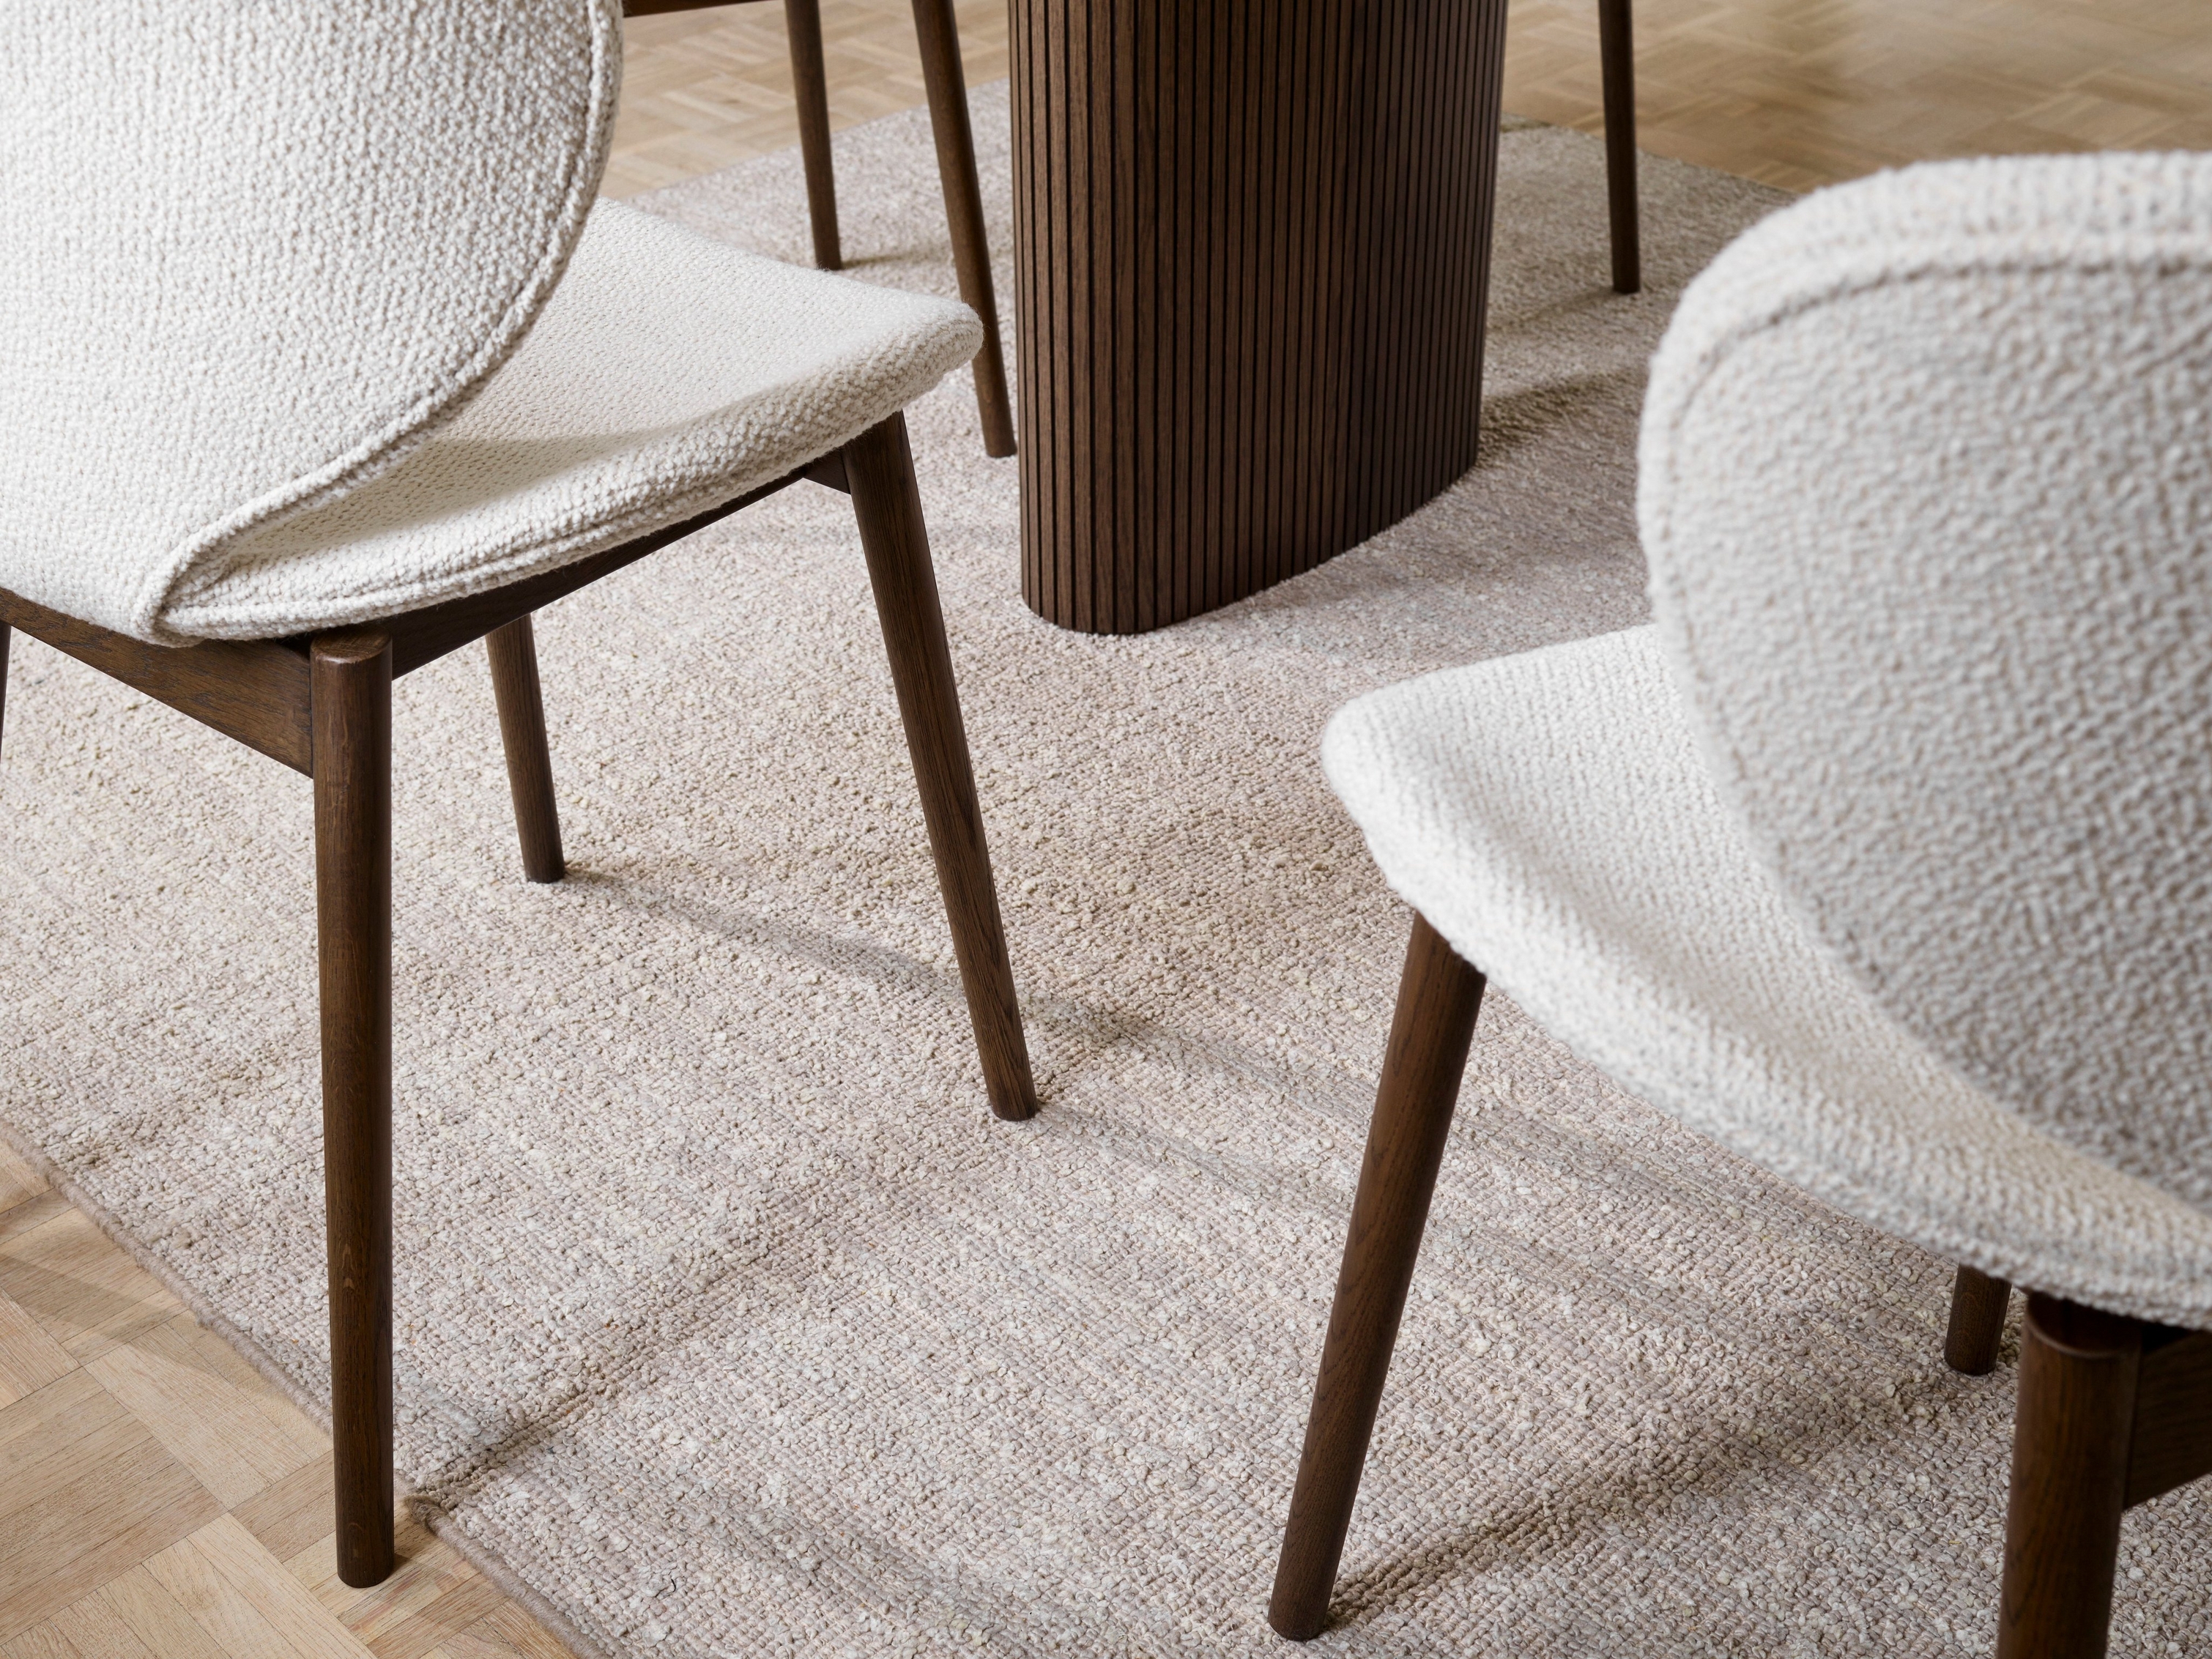 Textured Hamilton chairs and carpet with a wooden table, focused on floor detail.